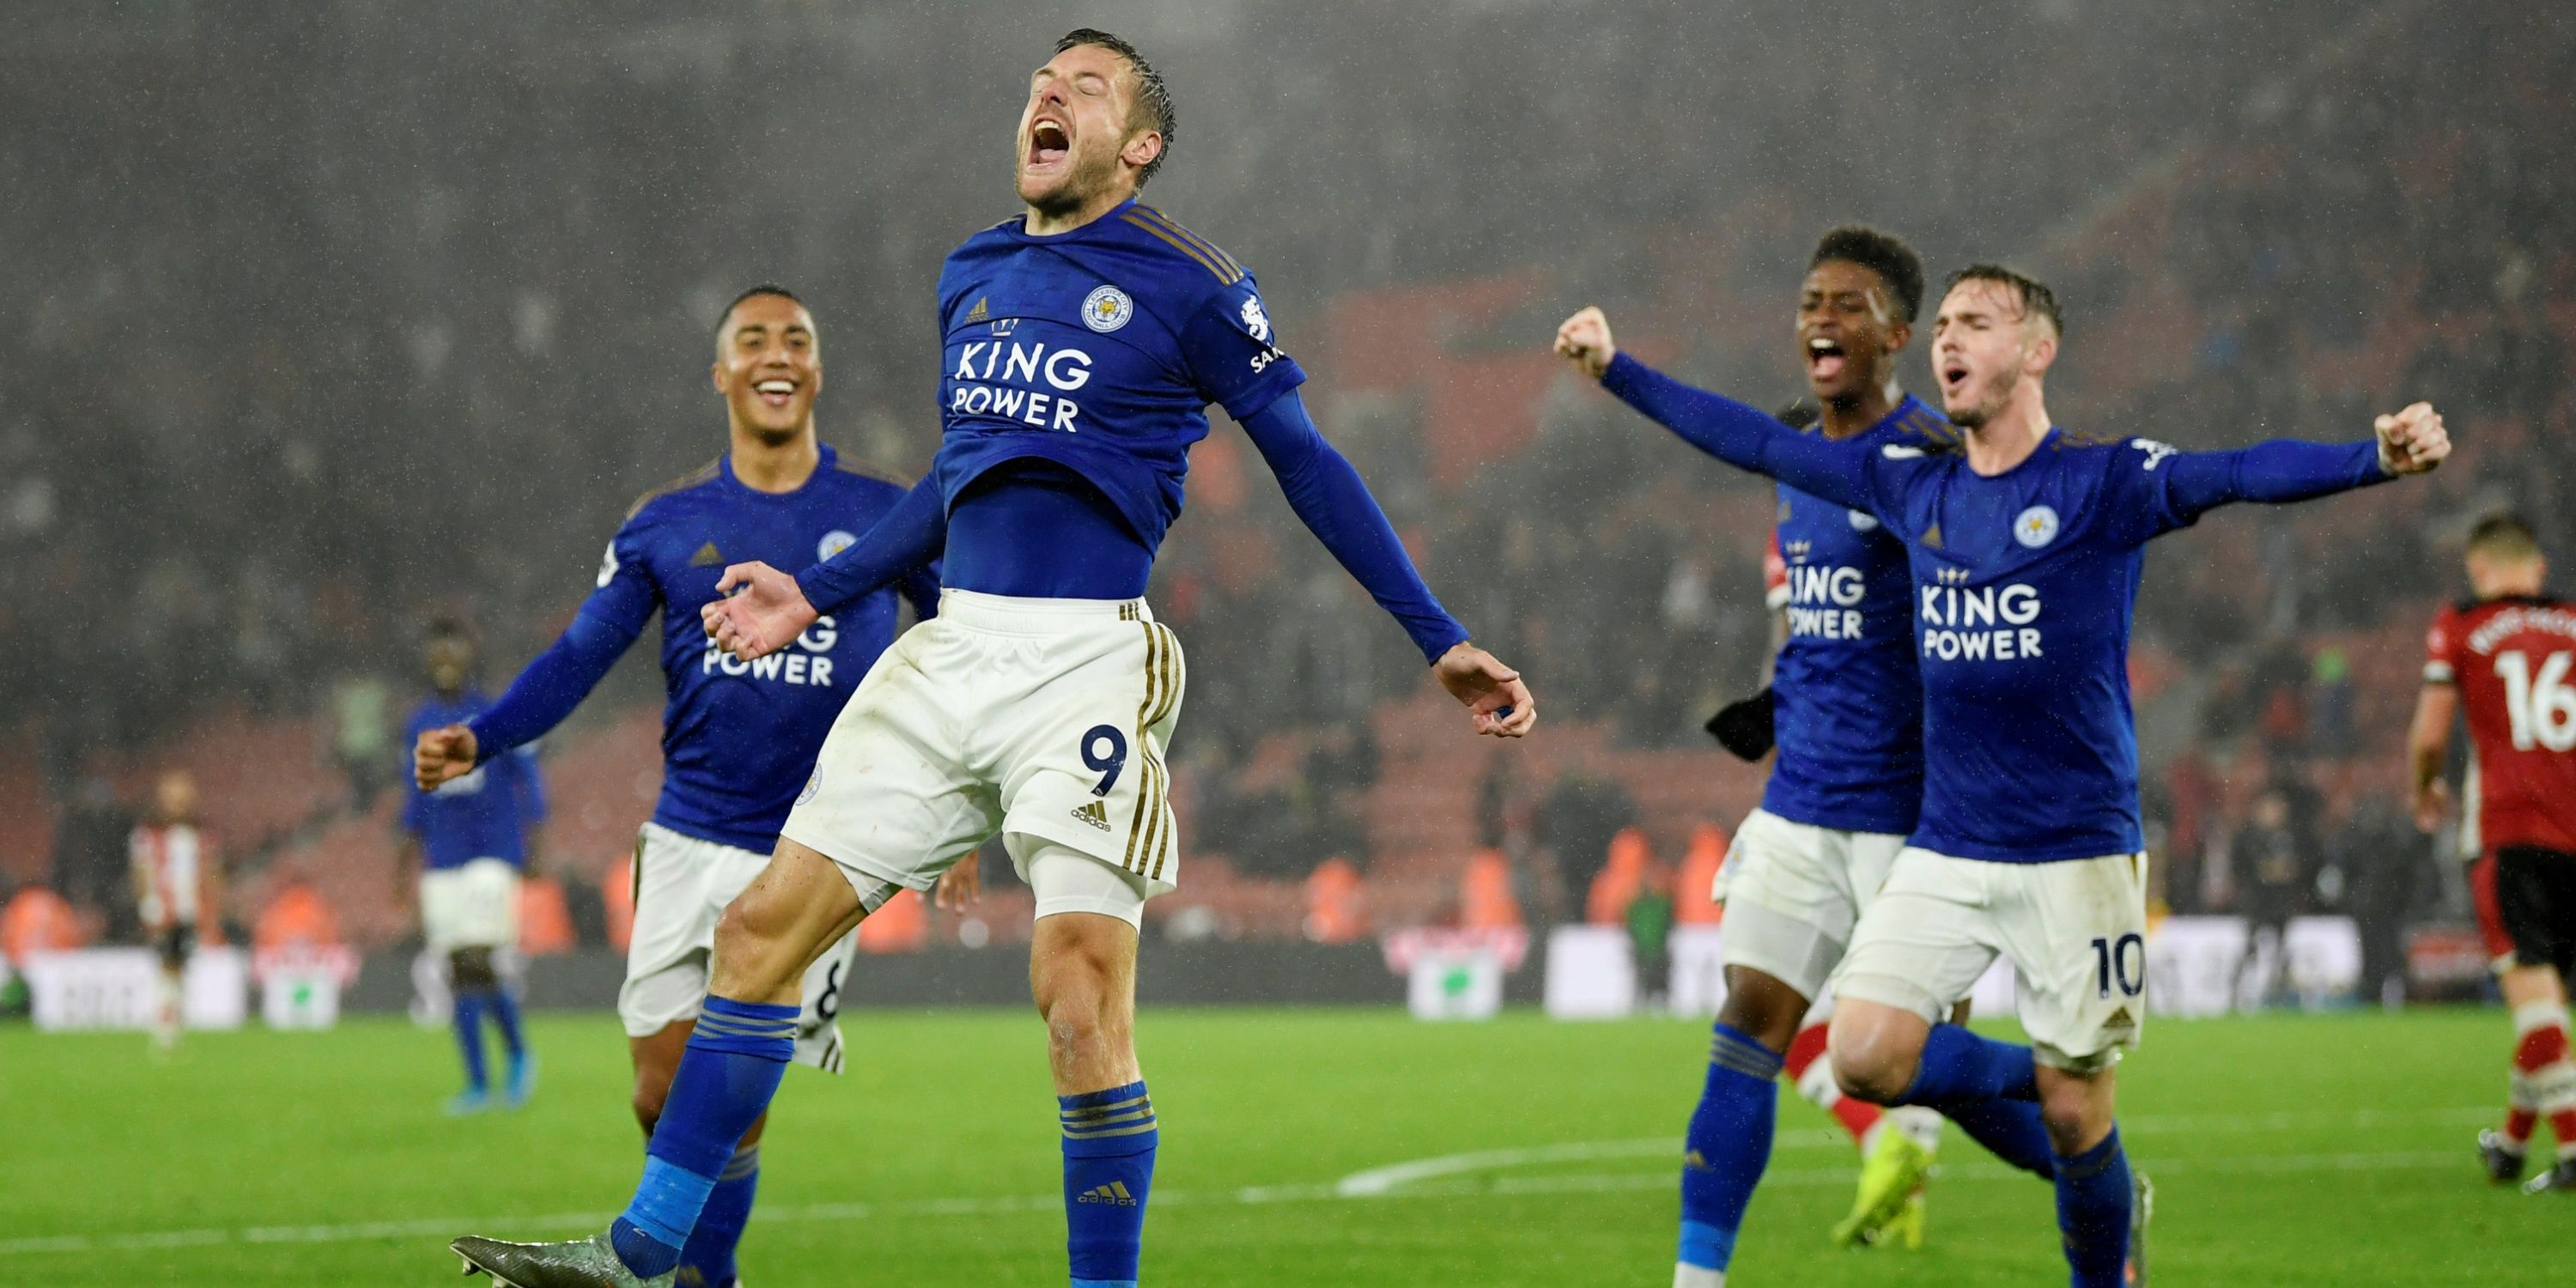 Leicester City's Jamie Vardy jumps in the air in celebration, flanked by teammates Youri Tielemans, Demarai Gray and James Maddison.